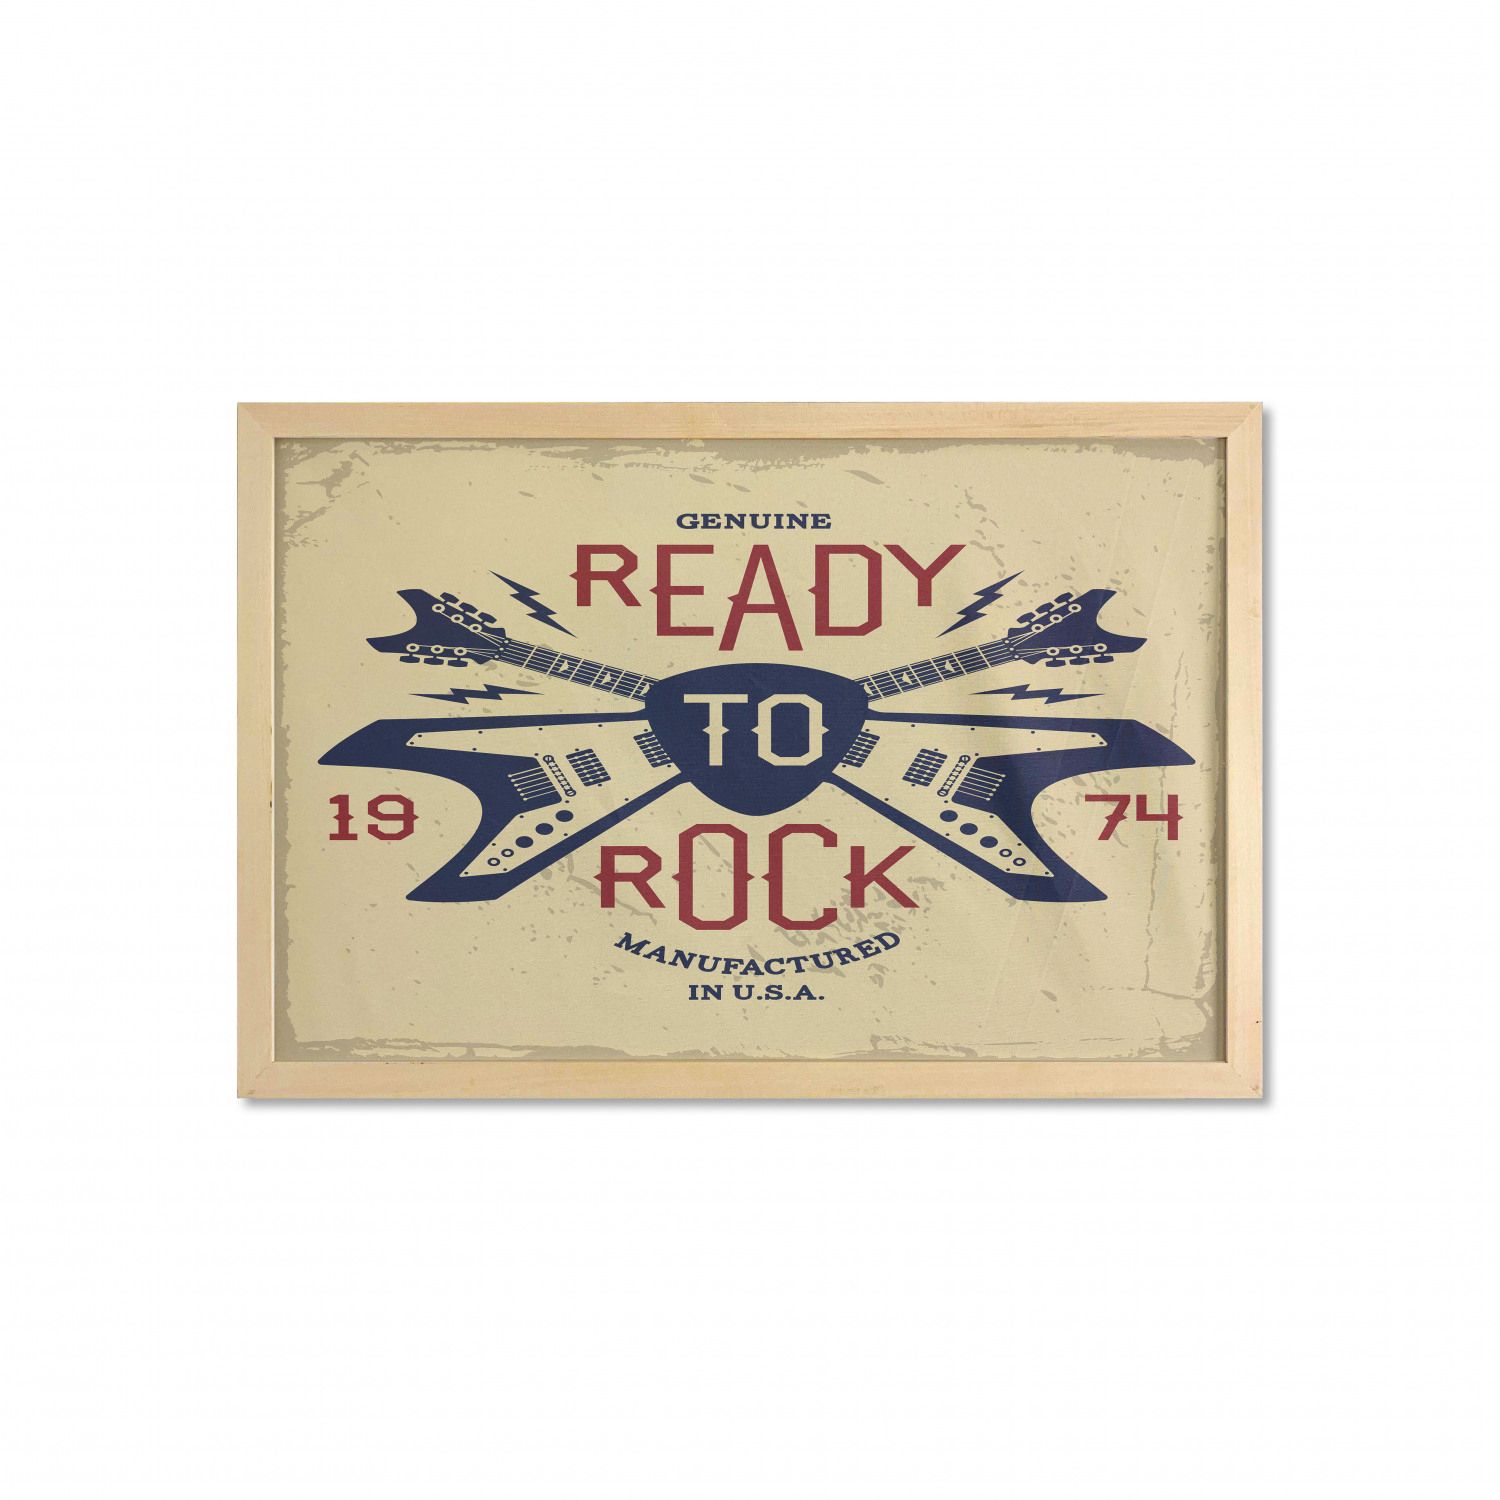 Classic Rock Wall Art With Frame, Ready To Rock Saying With Flying V Guitar  And Pick Vintage Print, Printed Fabric Poster For Bathroom Living Room, 35"  X 23", Beige Ruby Night Blue, Pertaining To Current Classic Rock Wall Art (View 12 of 20)